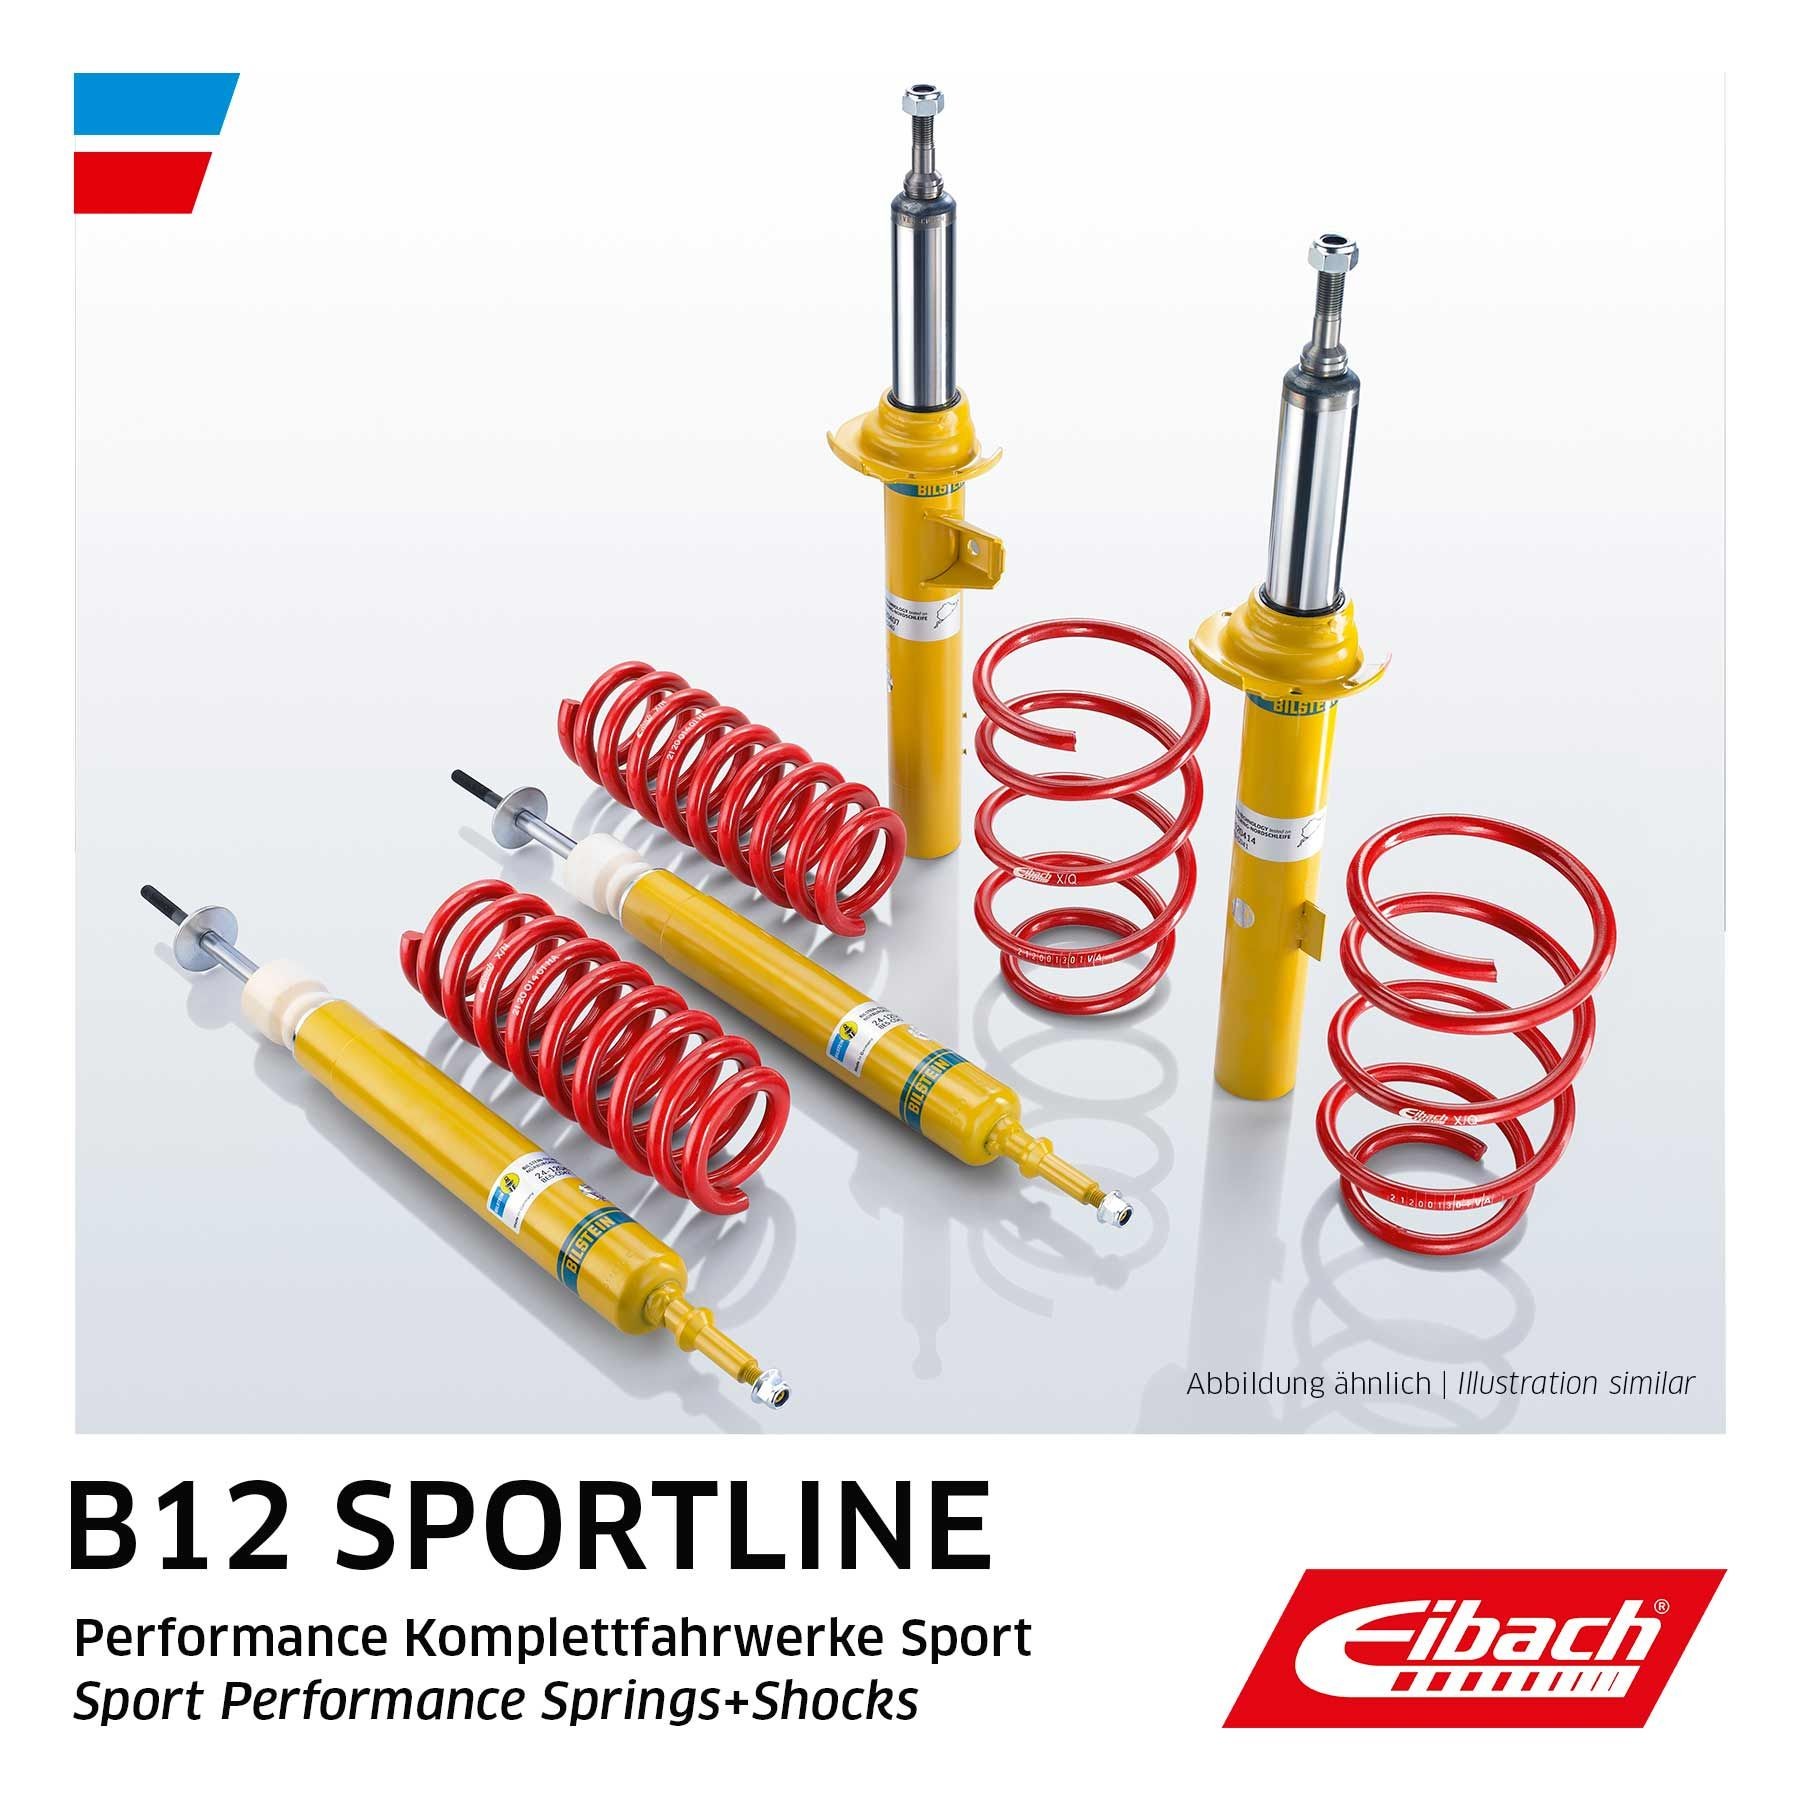 Citroën Suspension Kit, coil springs / shock absorbers EIBACH E95-22-002-01-20 at a good price